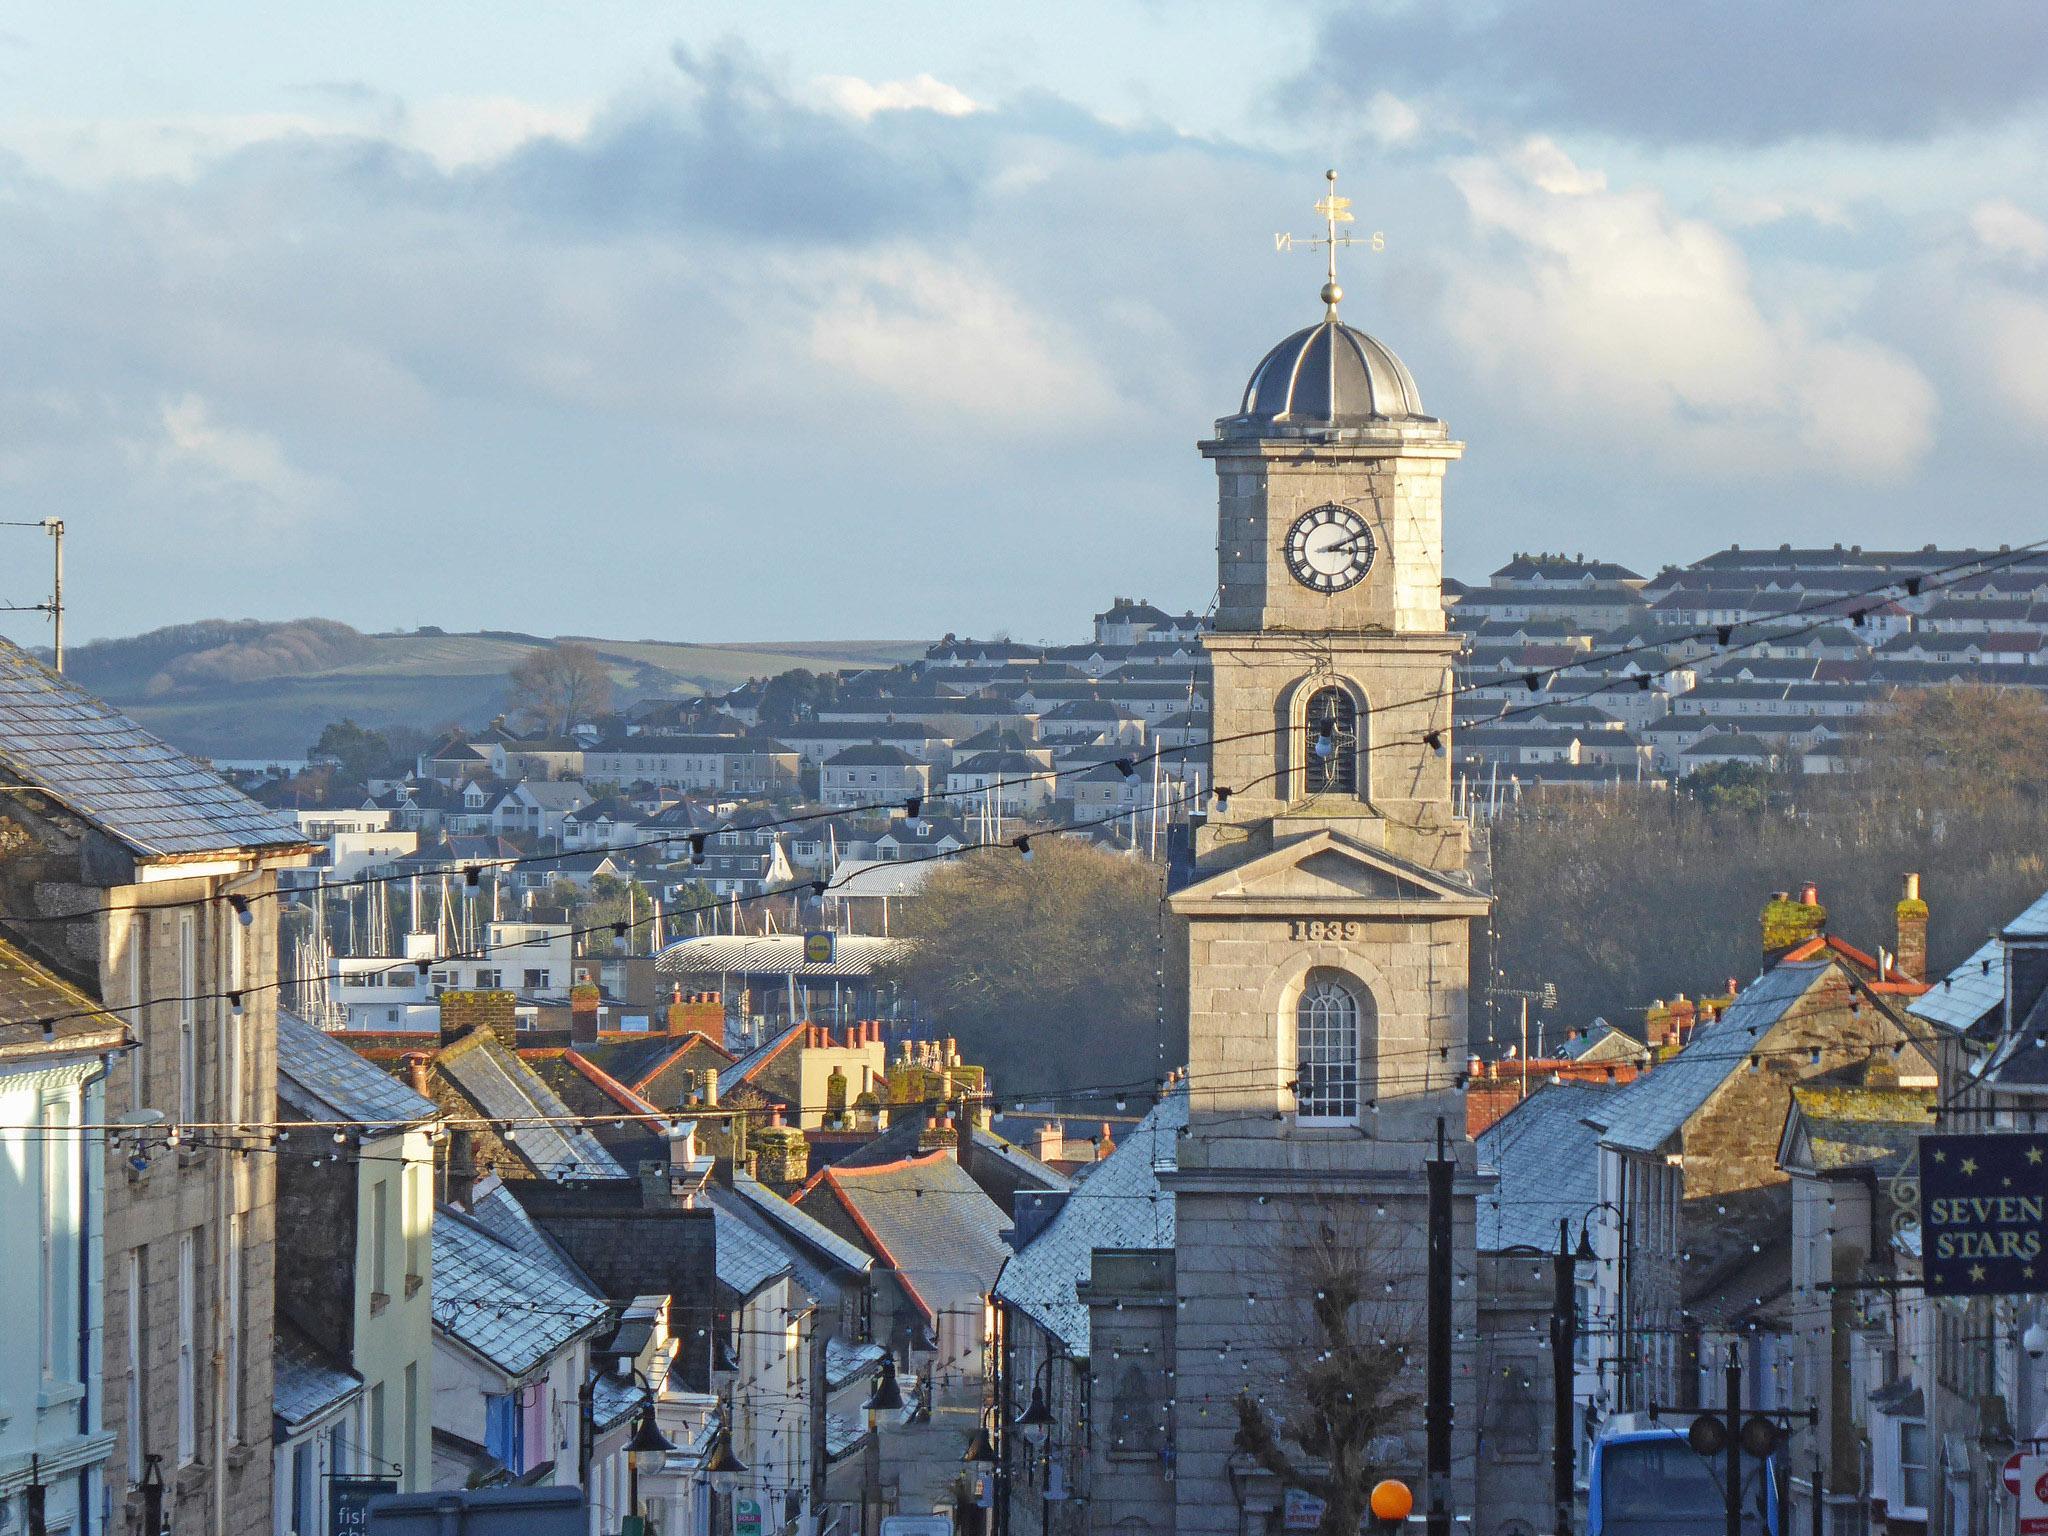 Penryn Town Centre and Clock Tower